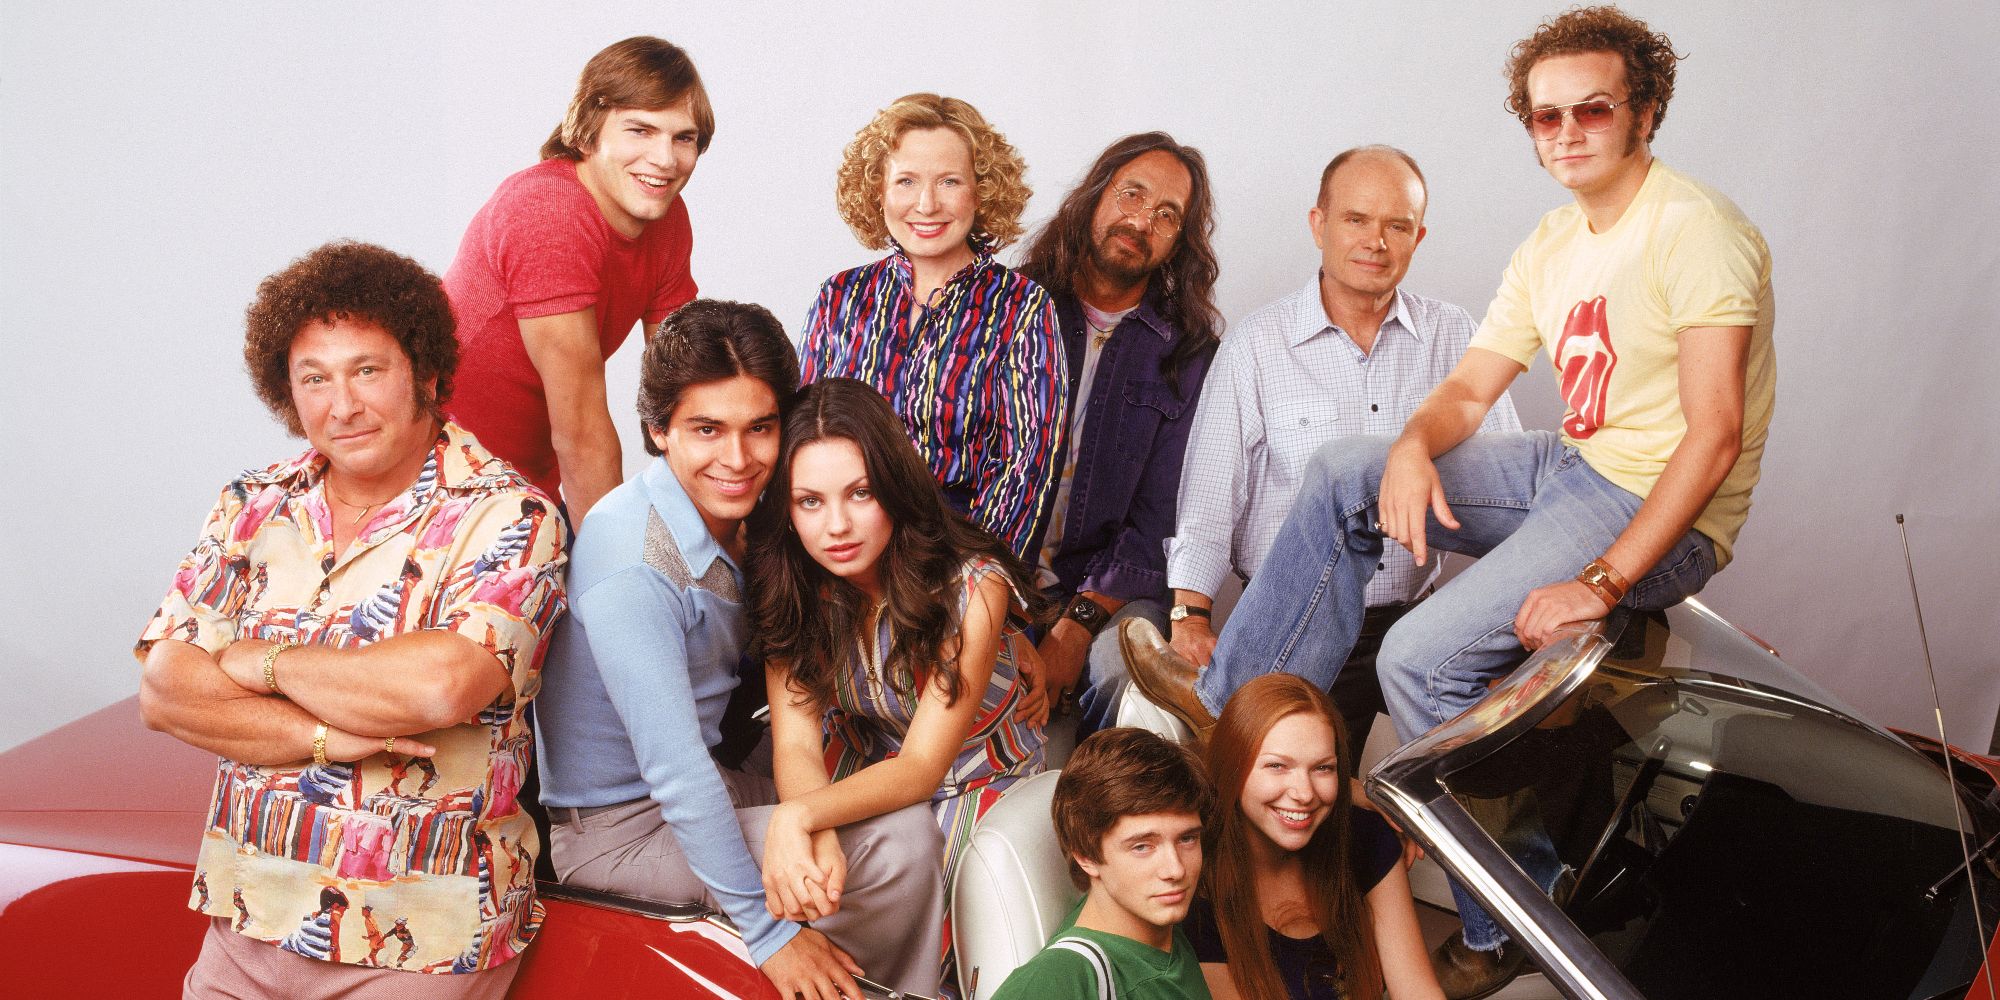 That 70s Show Reunion Needs To Happen (& Be Set In The 90s)